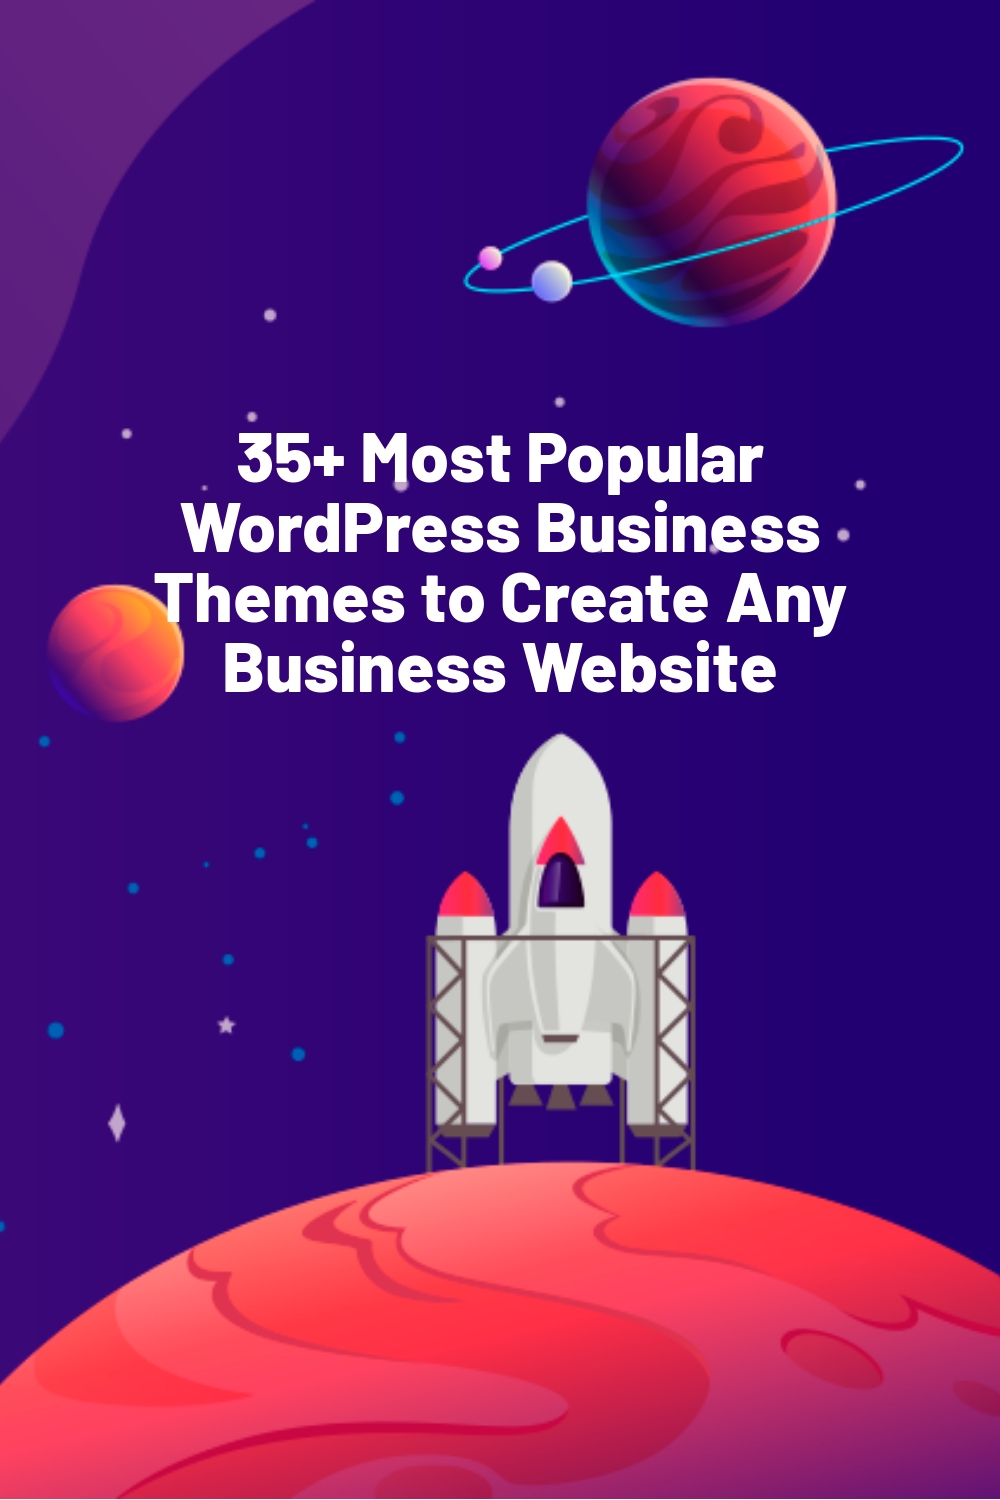 35+ Most Popular WordPress Business Themes to Create Any Business Website